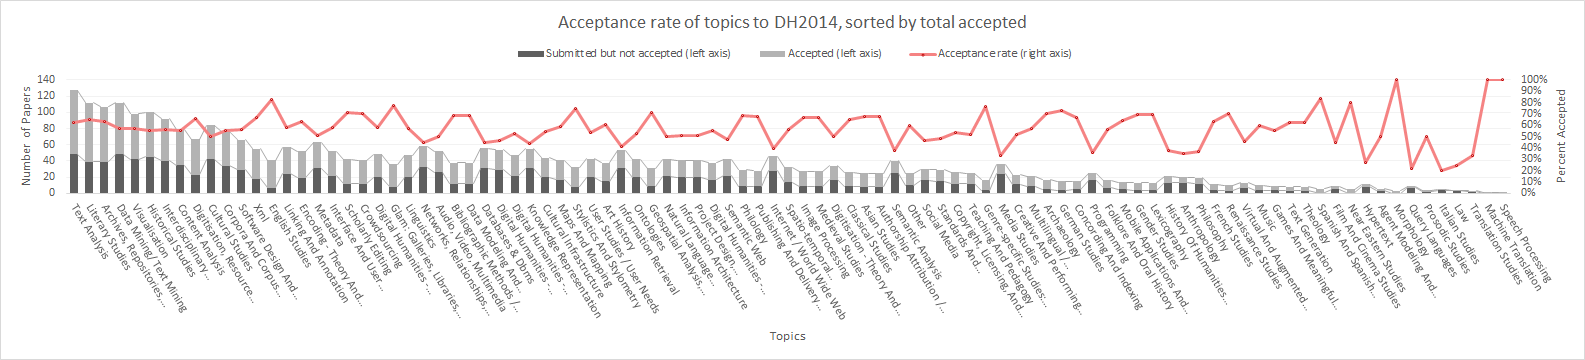 Figure 3. Topical acceptance to DH2014 sorted by total number of accepted papers tagged with a particular topic.